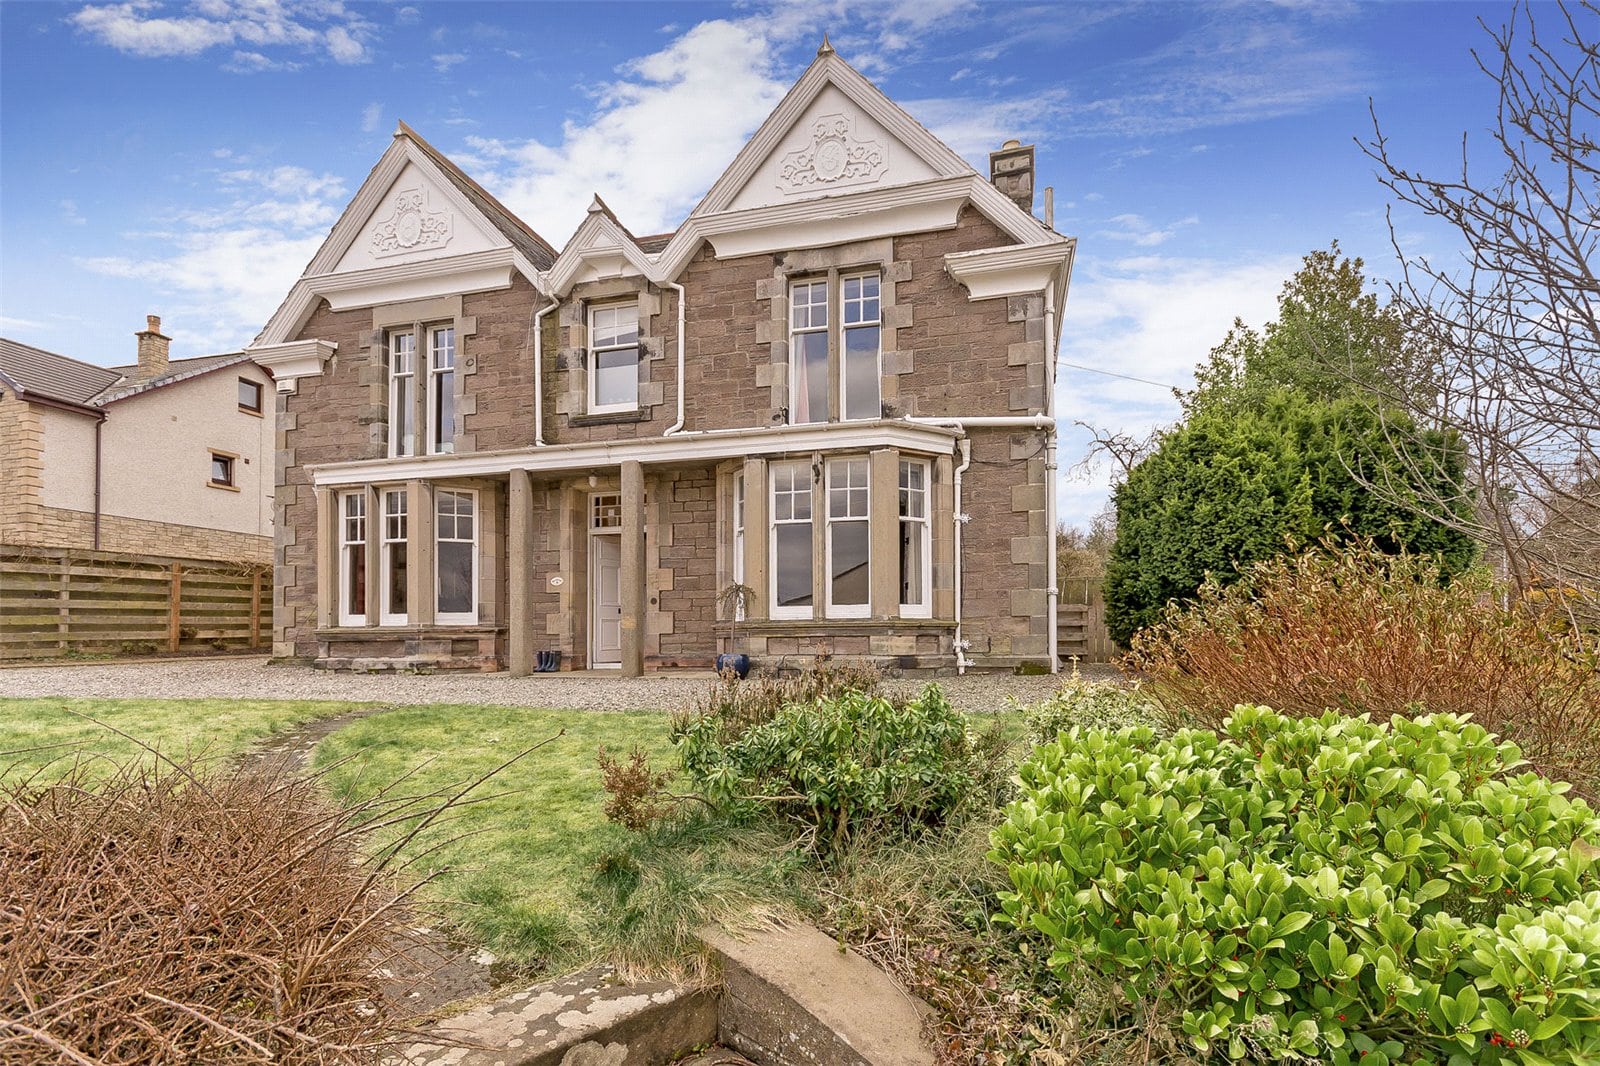 This half a million pound Victorian house is full of character